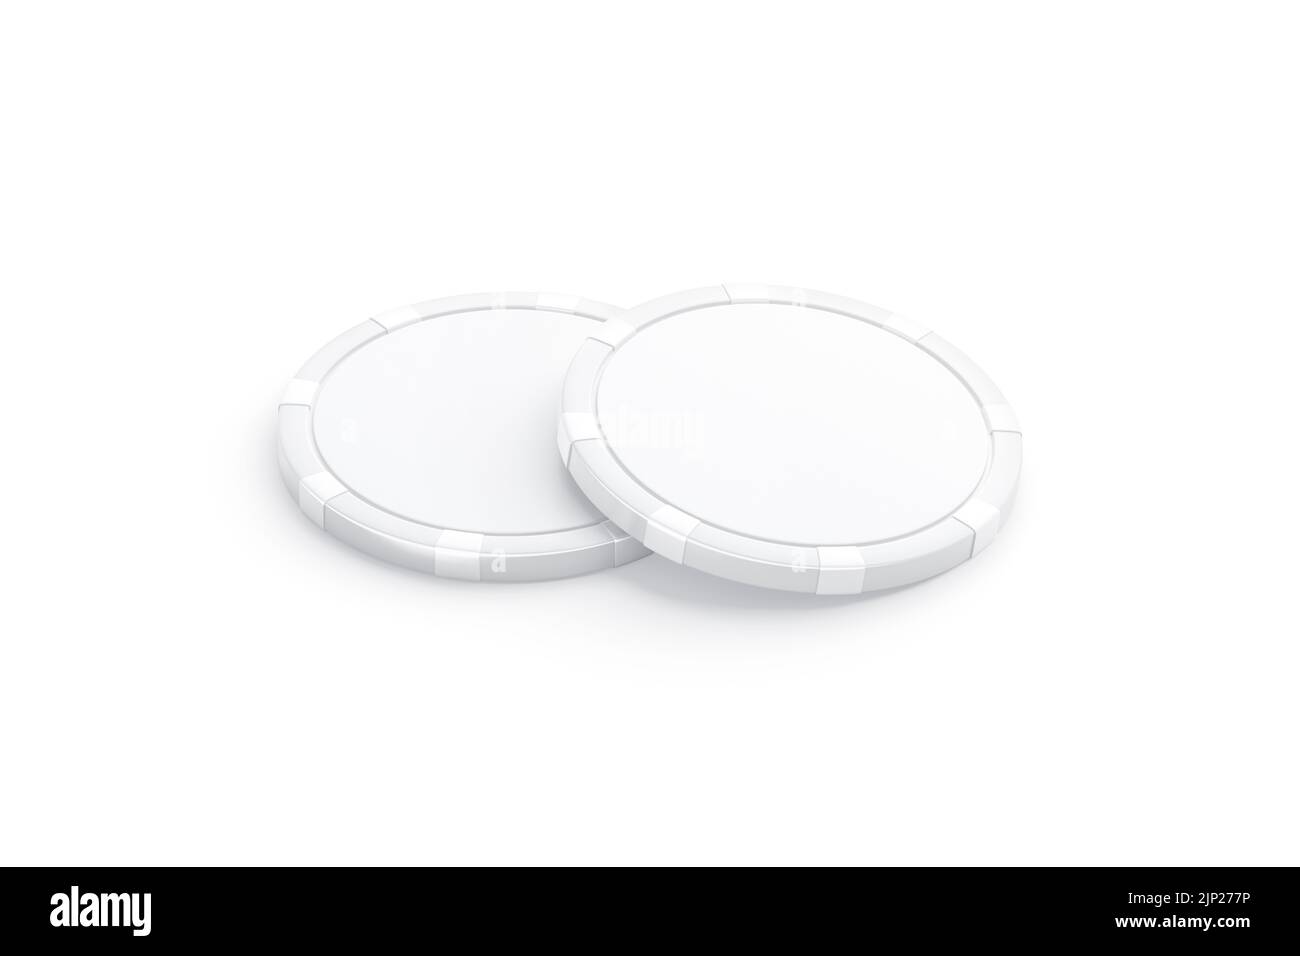 Blank white plastic round chip mockup pair, side view Stock Photo